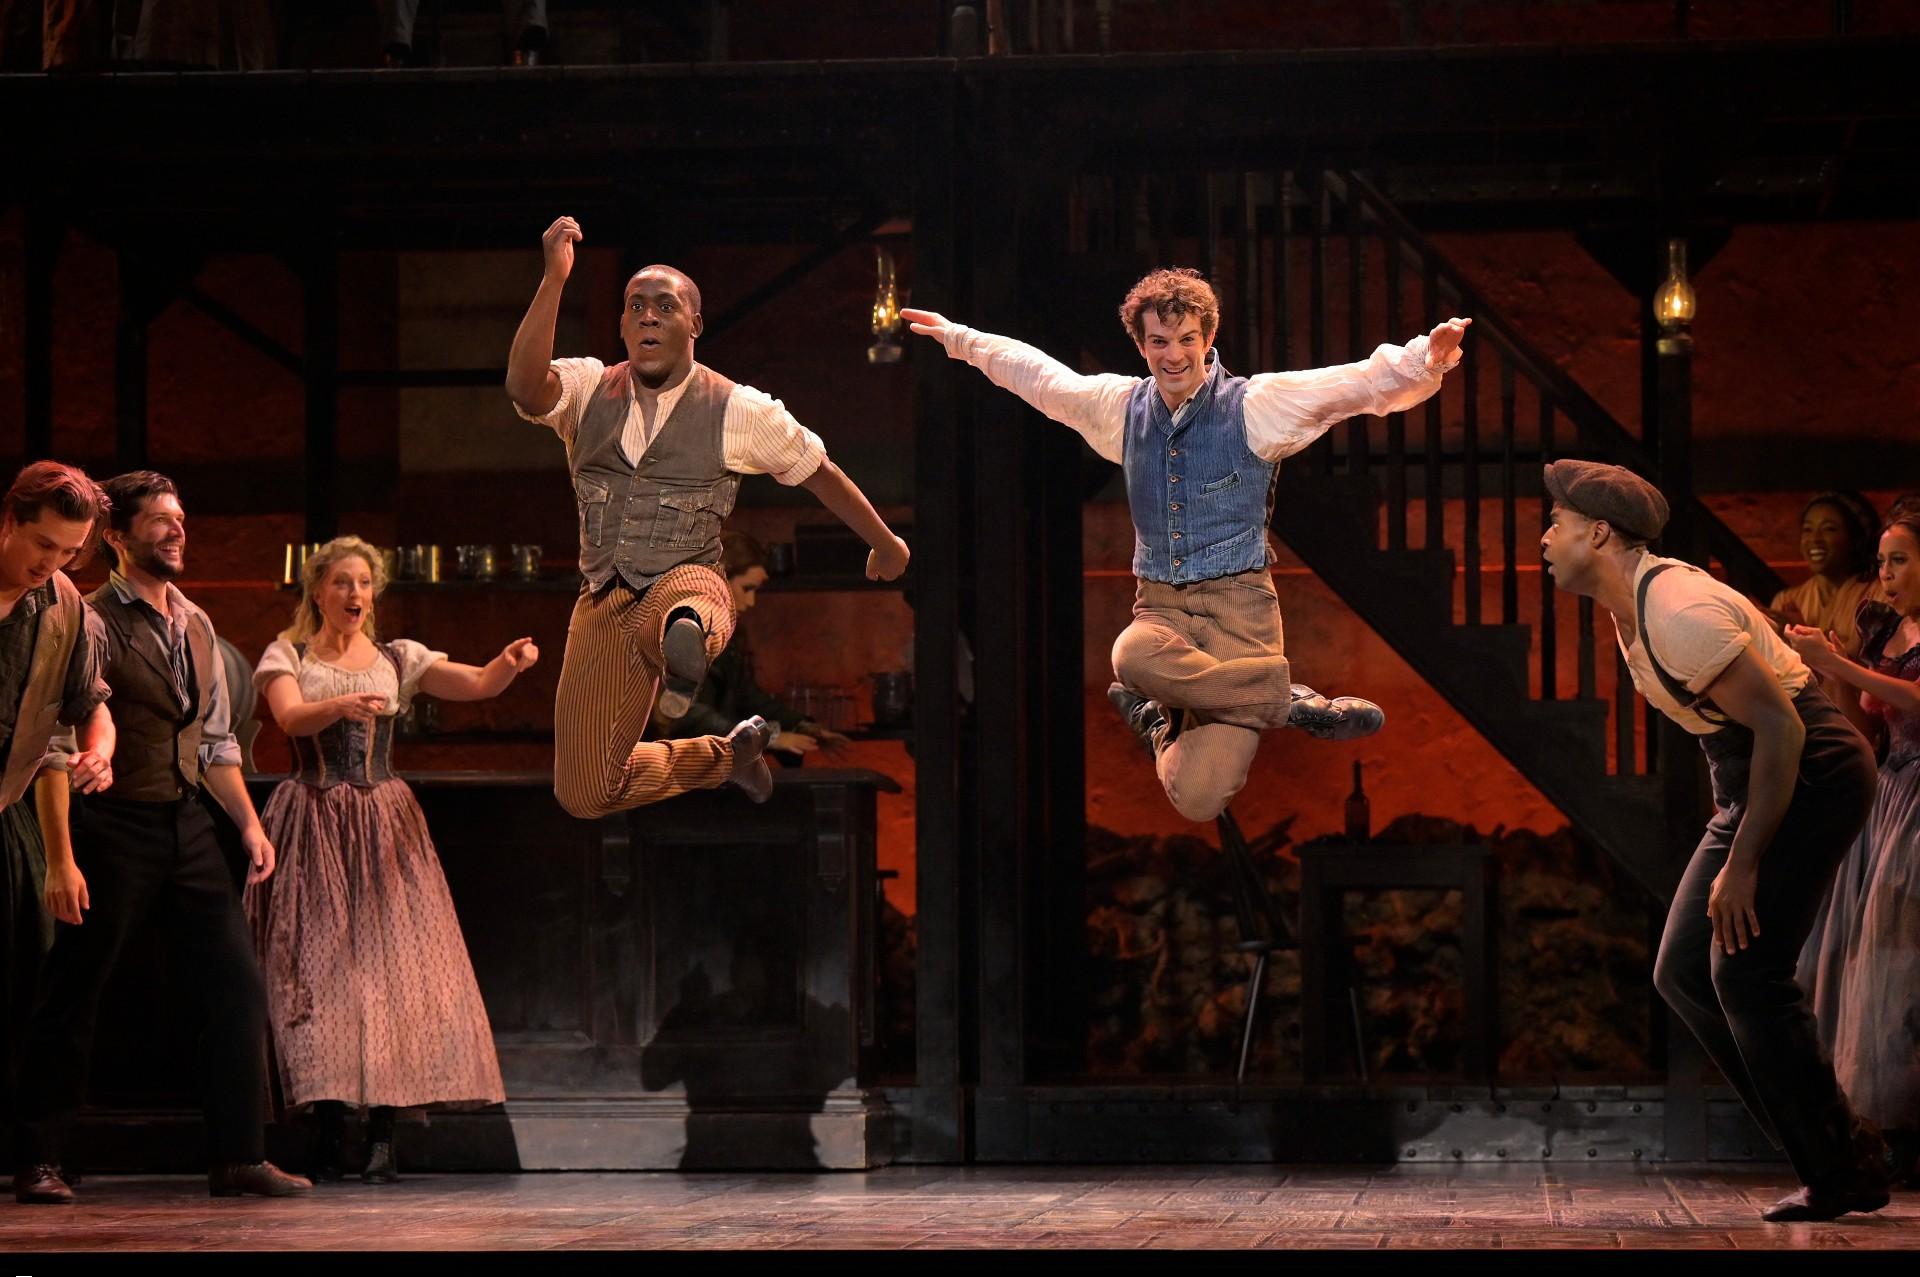 Sidney DuPont as Washington Henry, A.J. Shively as Owen Duignan and Ensemble in “Paradise Square” (© Kevin Berne)